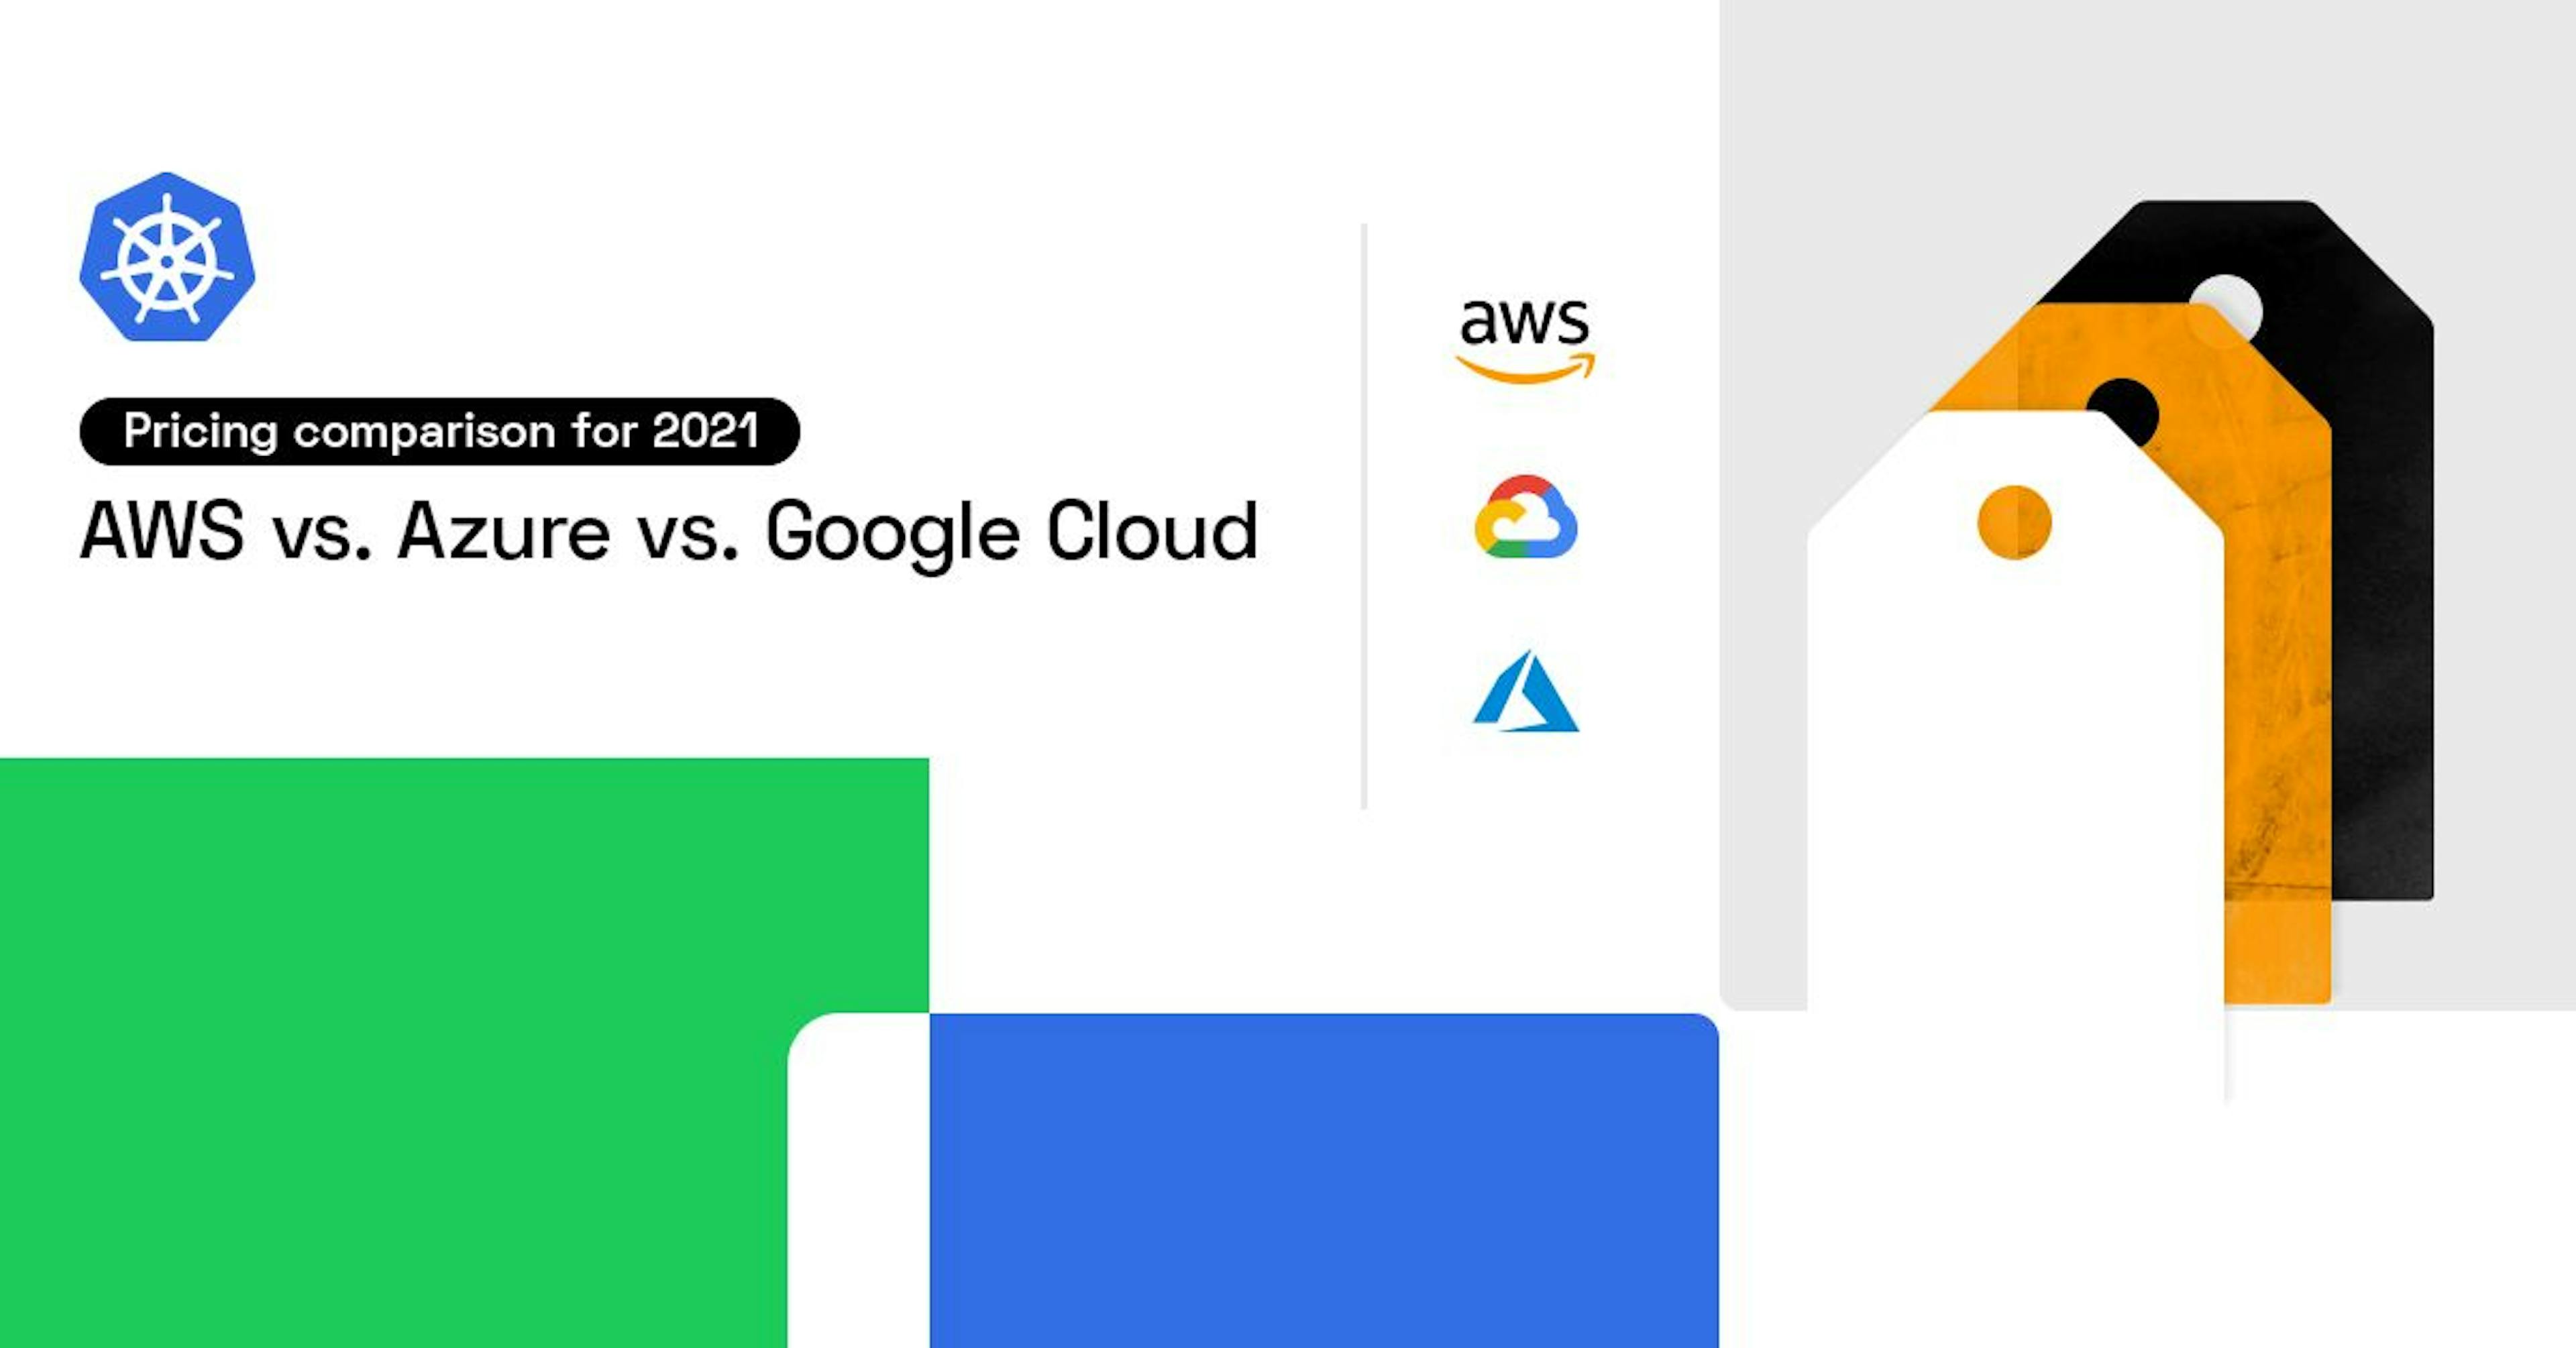 /aws-vs-azure-vs-google-cloud-which-one-delivers-most-value-for-the-price-70483265 feature image